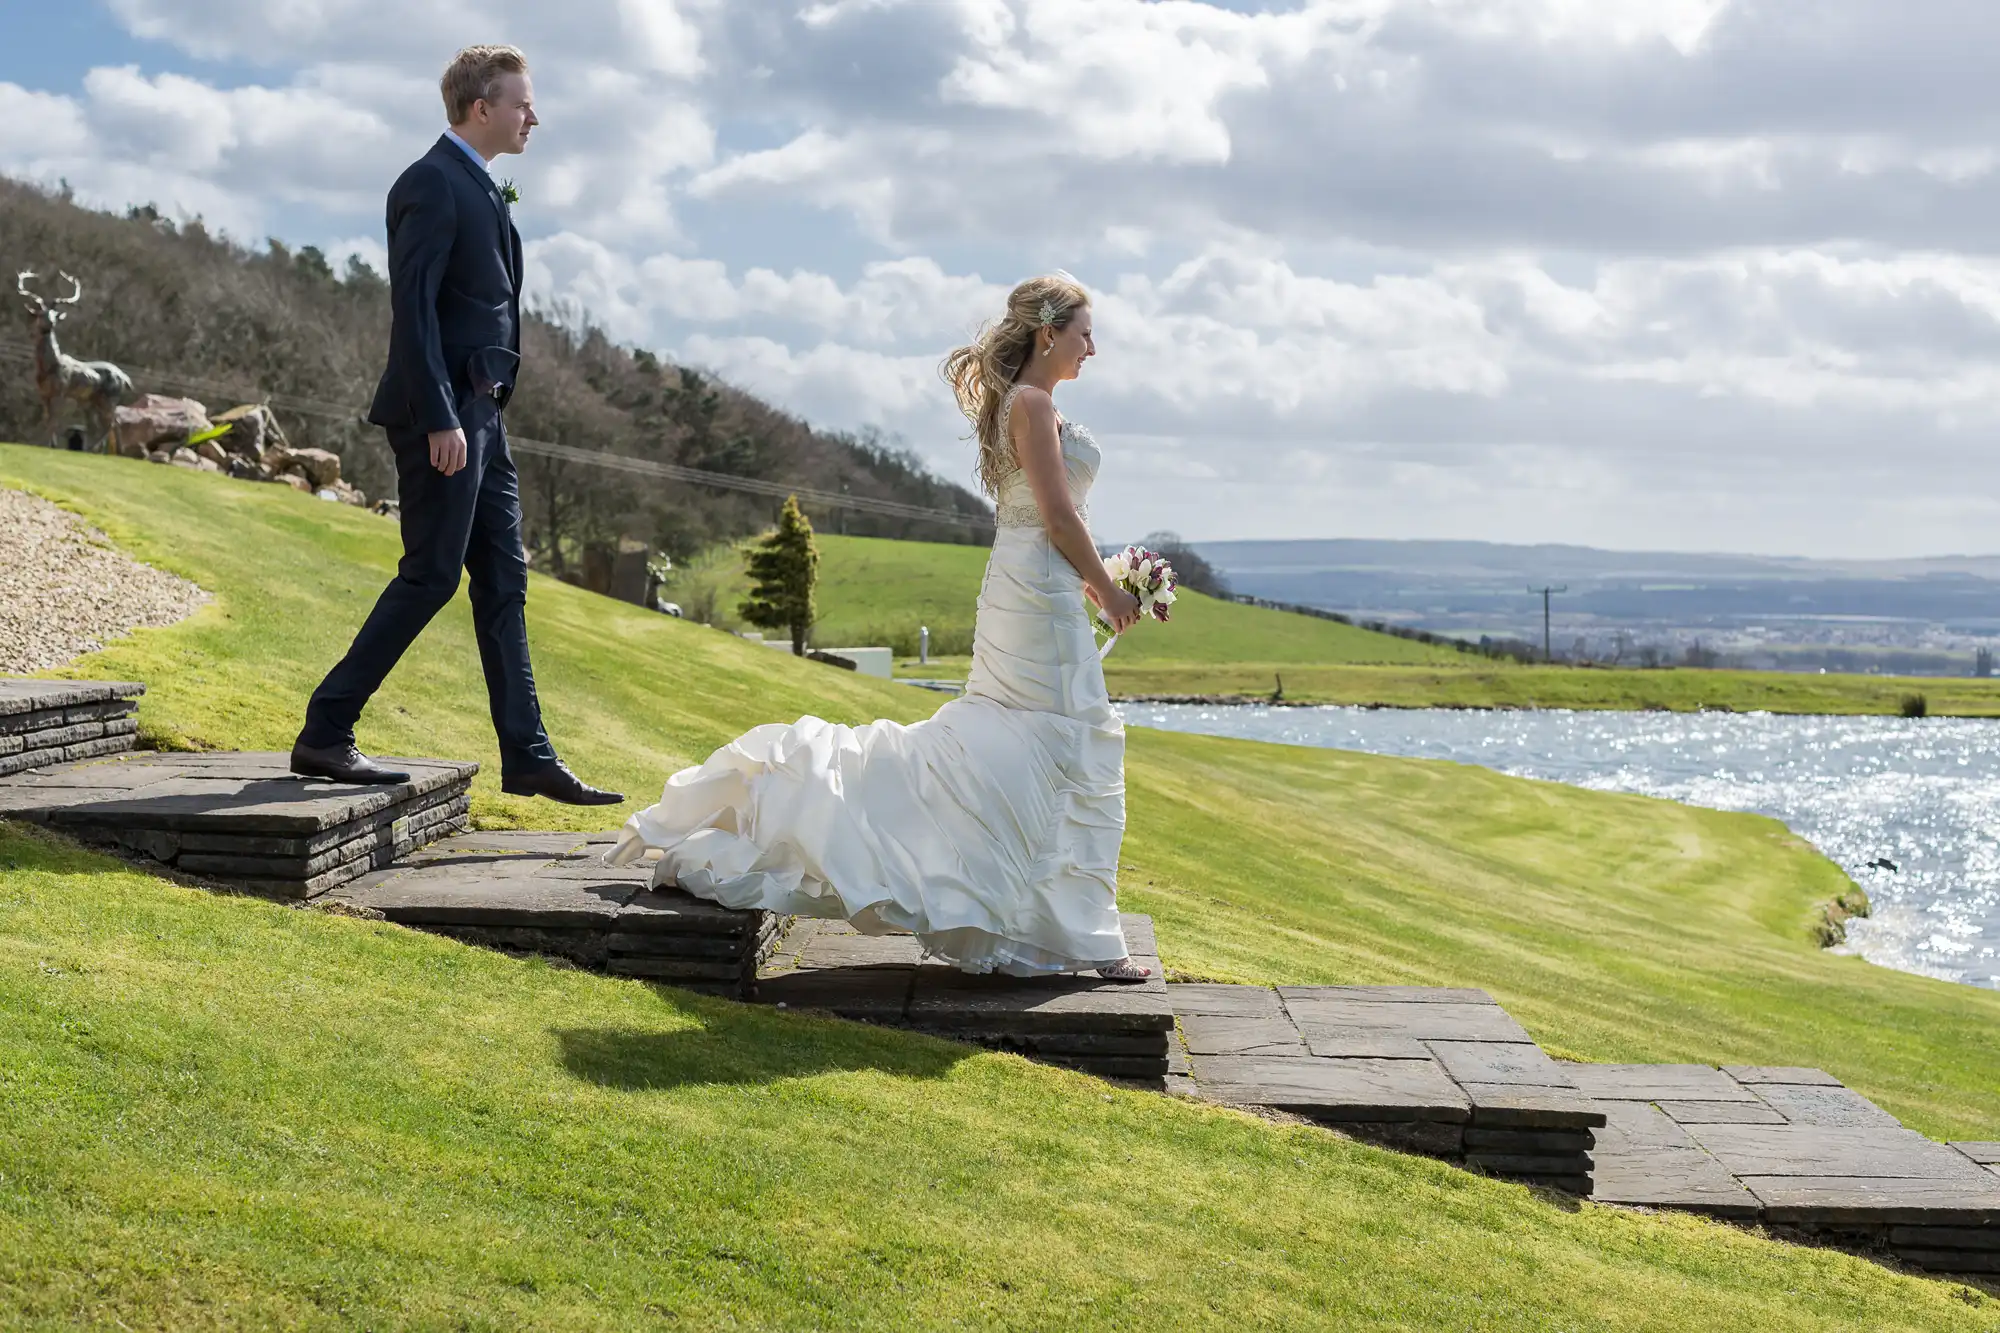 Bride and groom walking on a stone path beside a lake with rolling hills in the background under a partly cloudy sky.